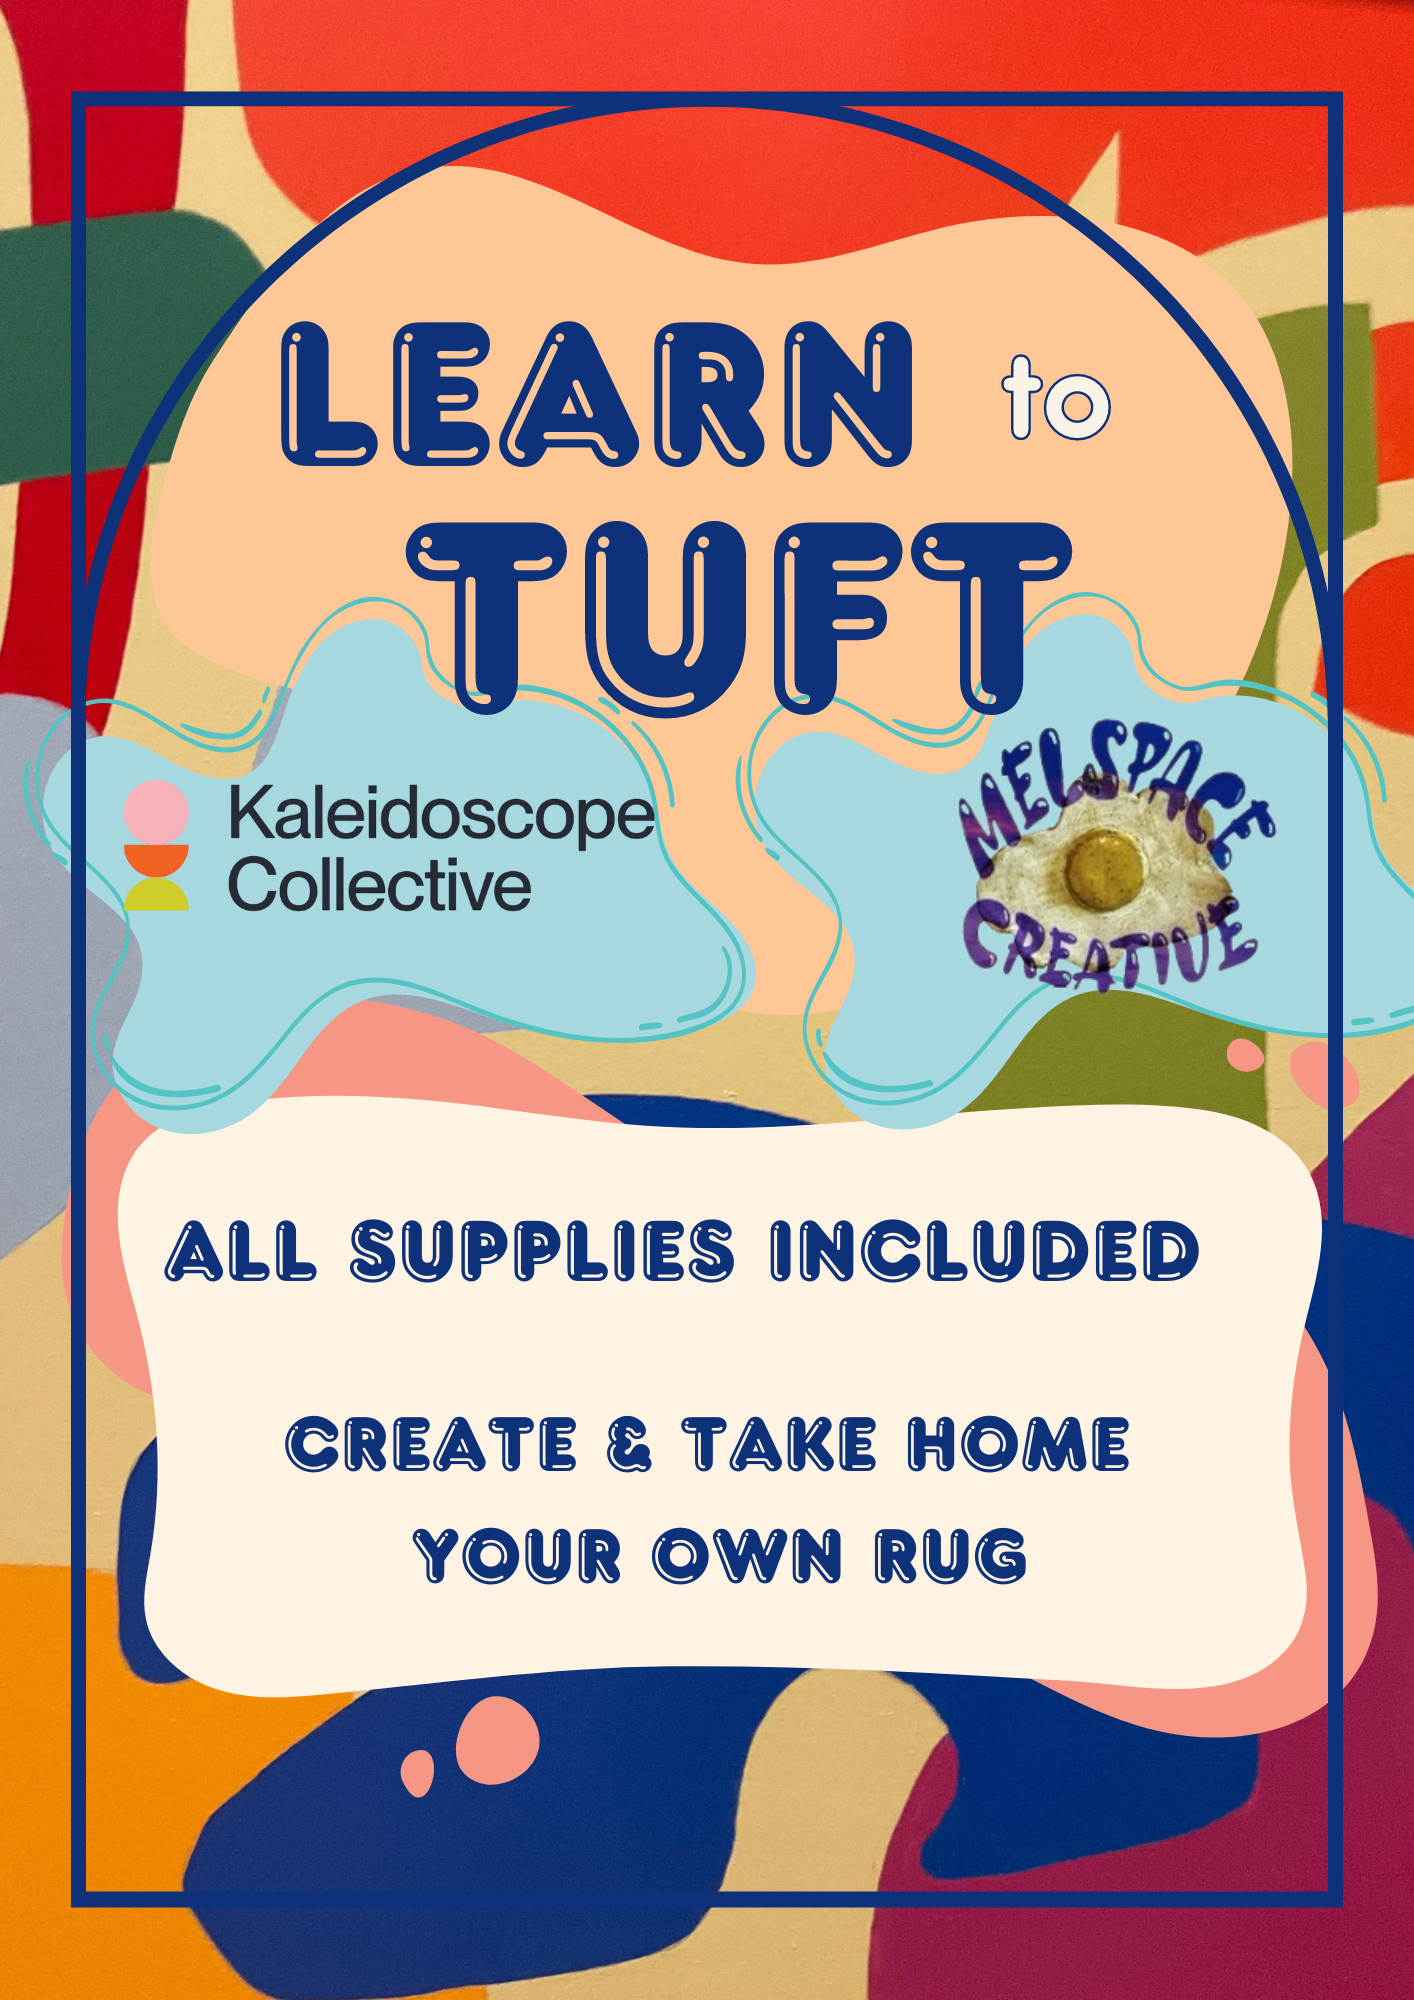 Learn to Tuft Workshop 🧶